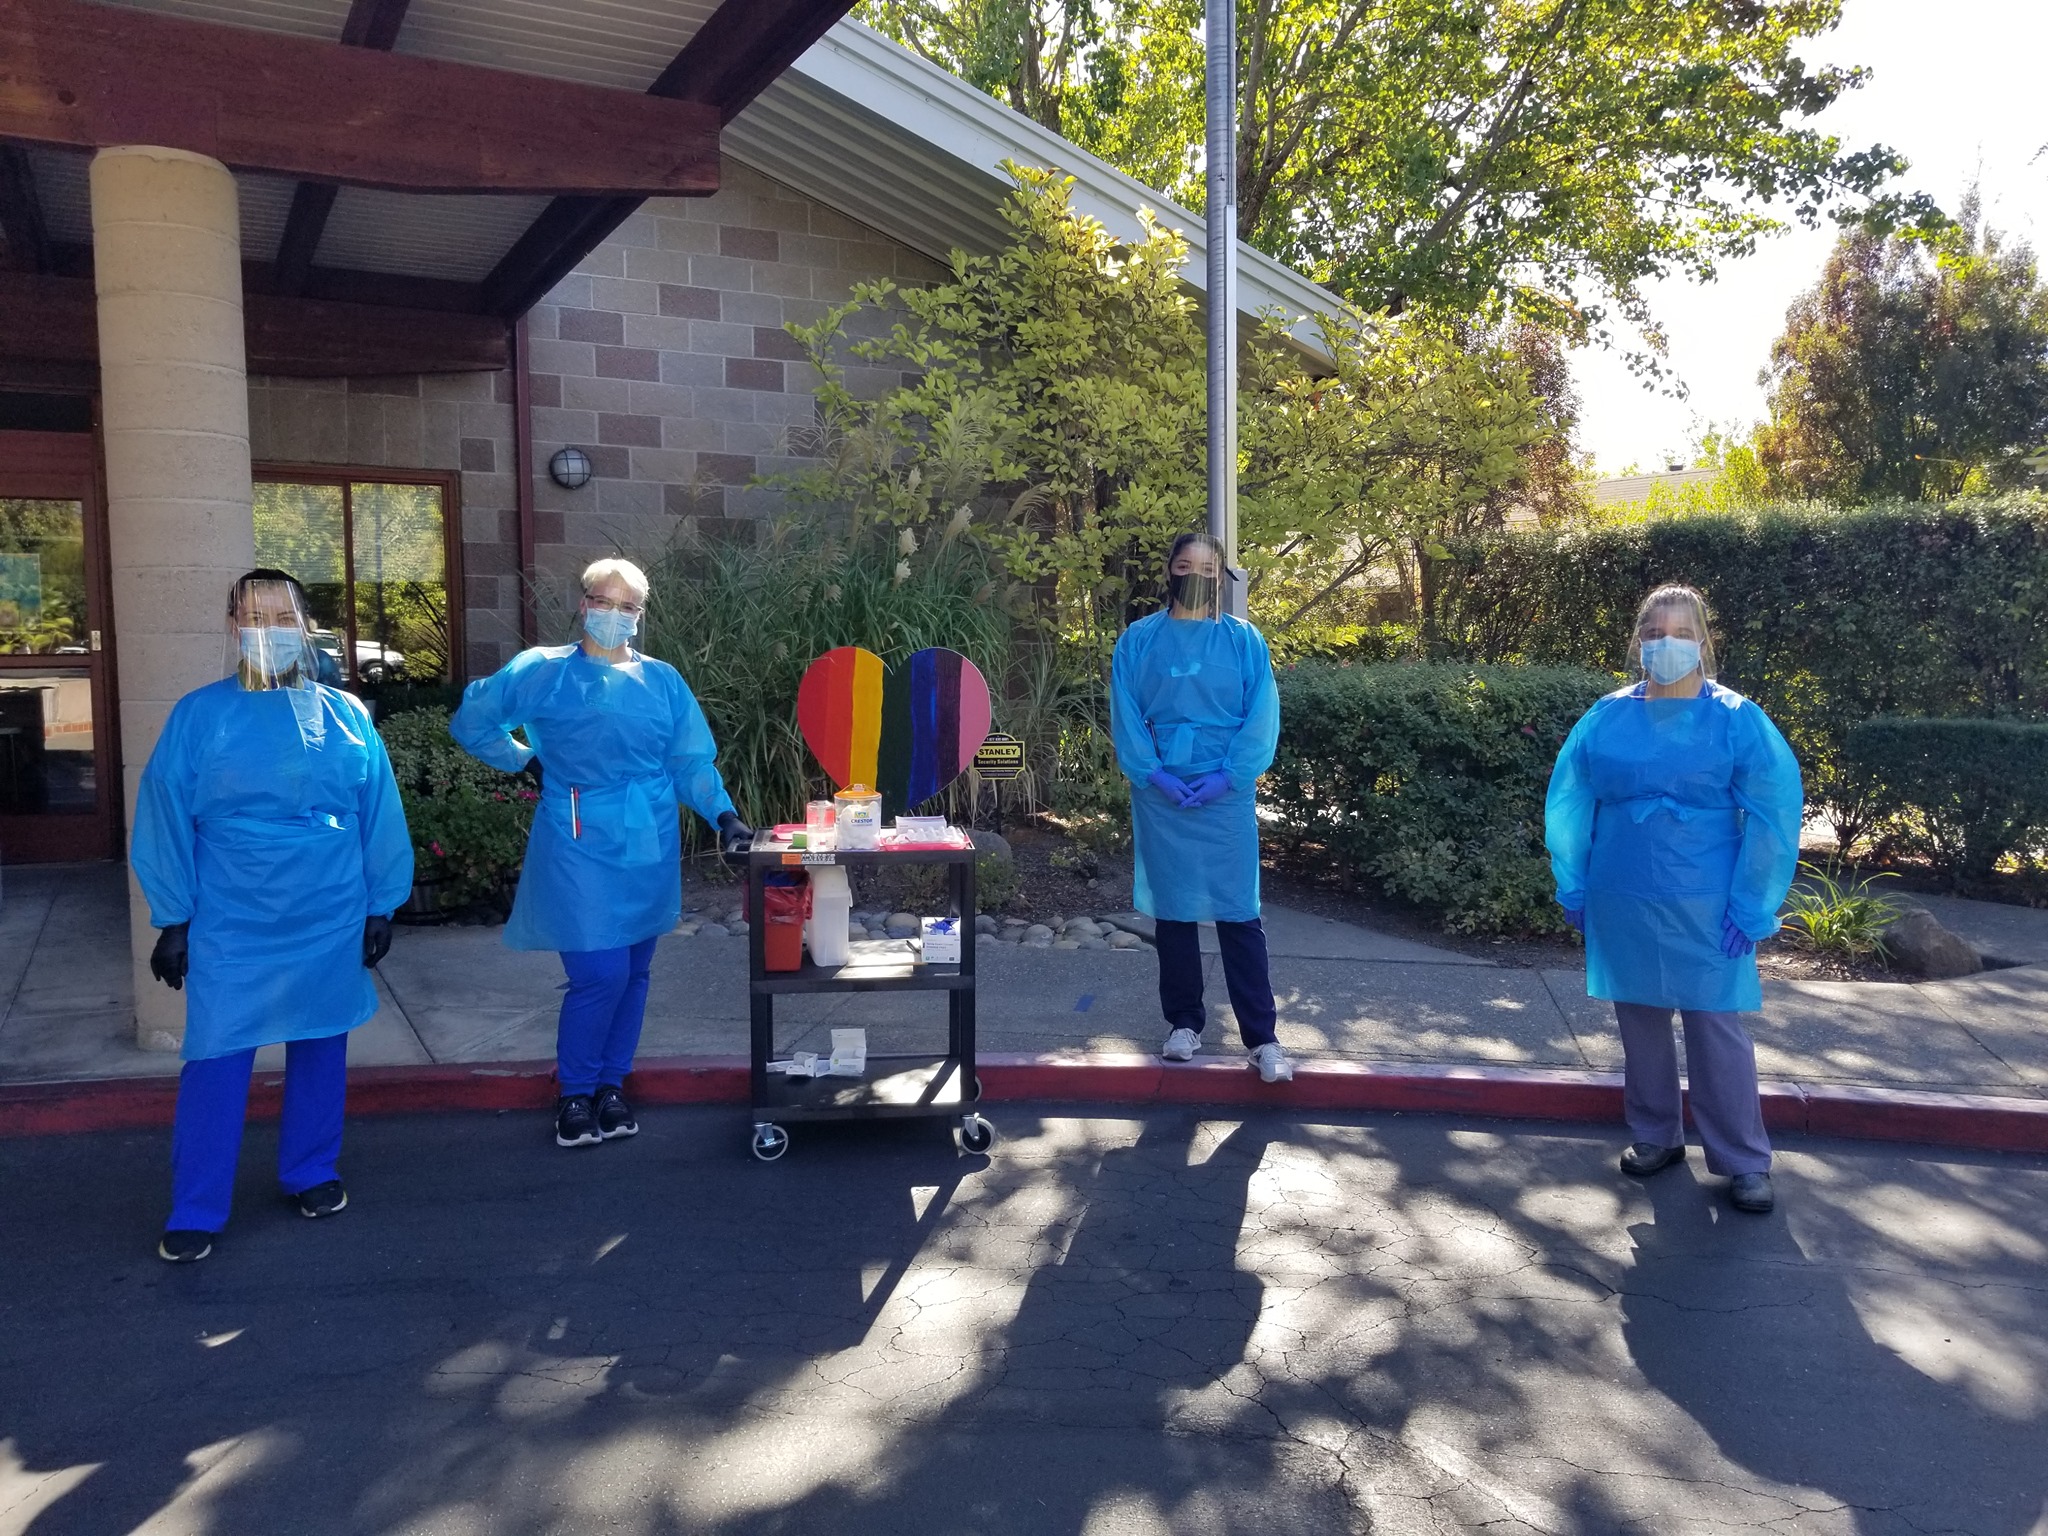 Sonoma Valley Community Health Center employees gathered outside wearing protective medical gear.